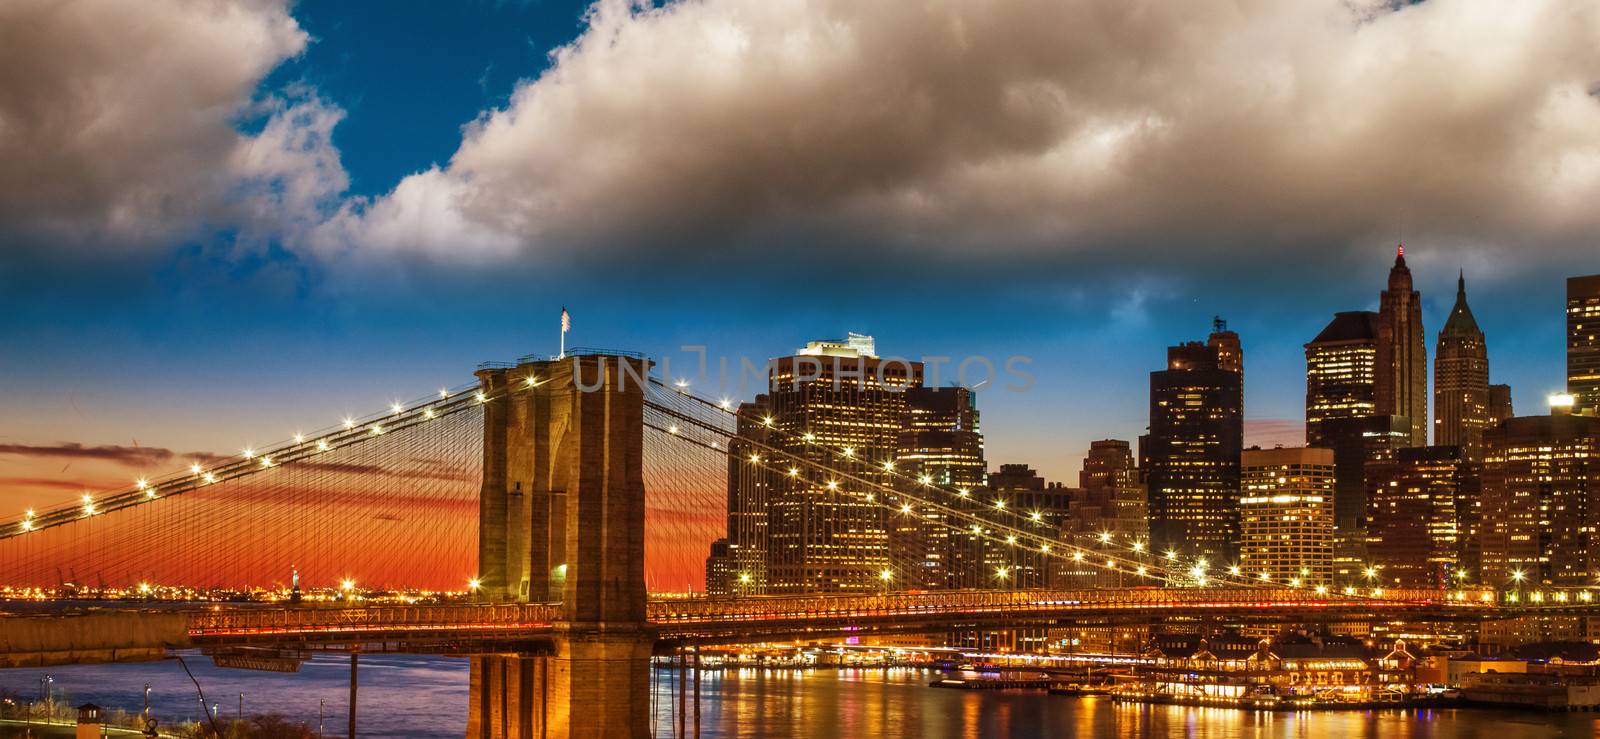 Amazing New York Cityscape - Skyscrapers and Brooklyn Bridge at by jovannig